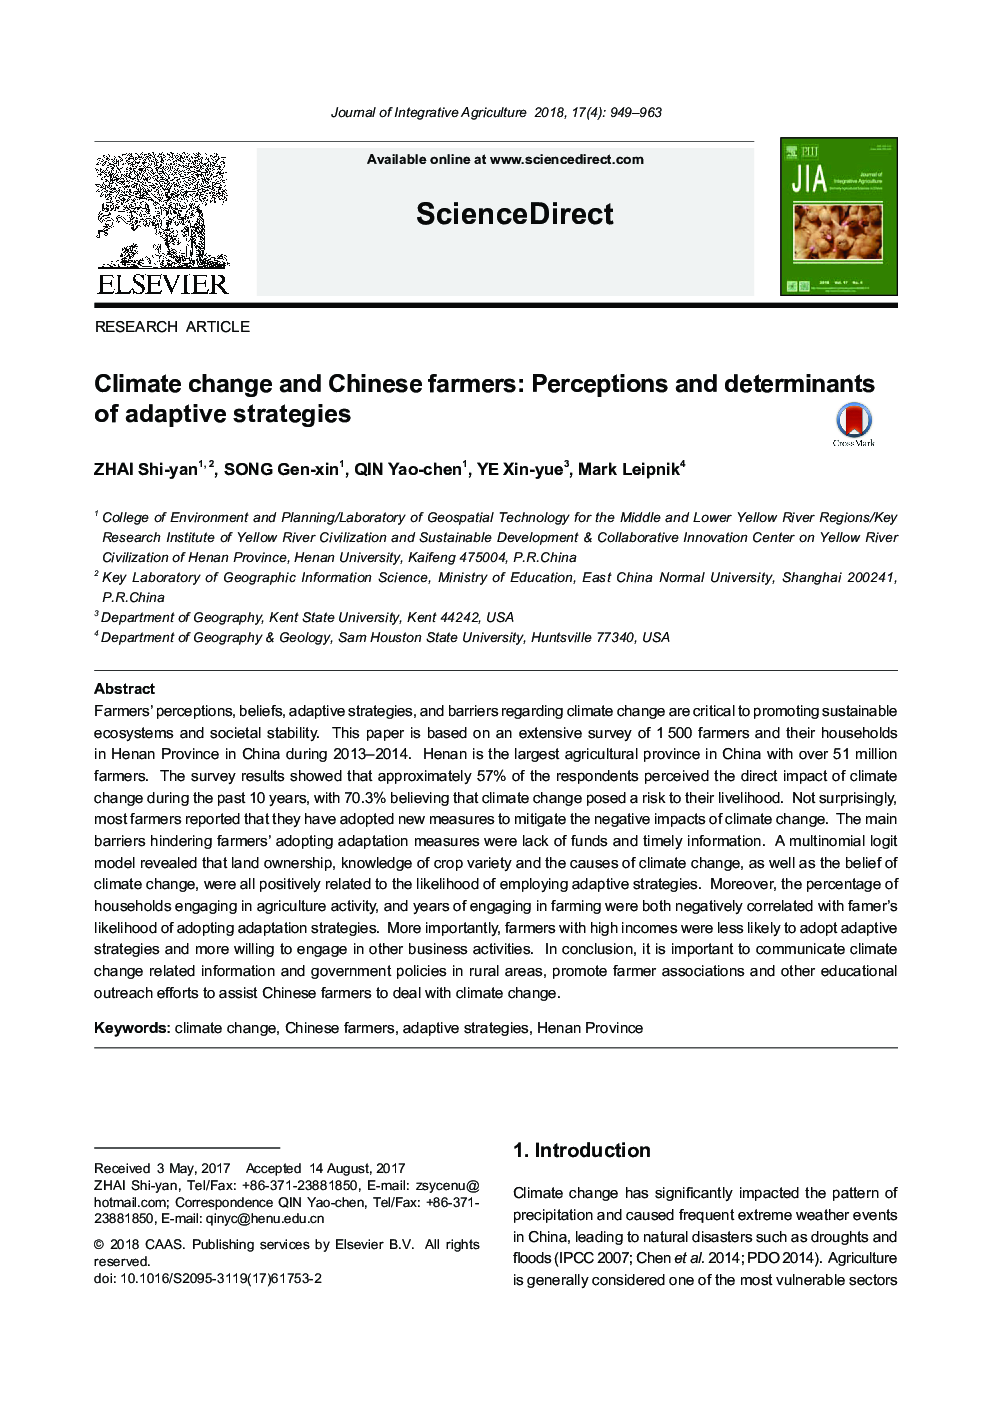 Climate change and Chinese farmers: Perceptions and determinants of adaptive strategies